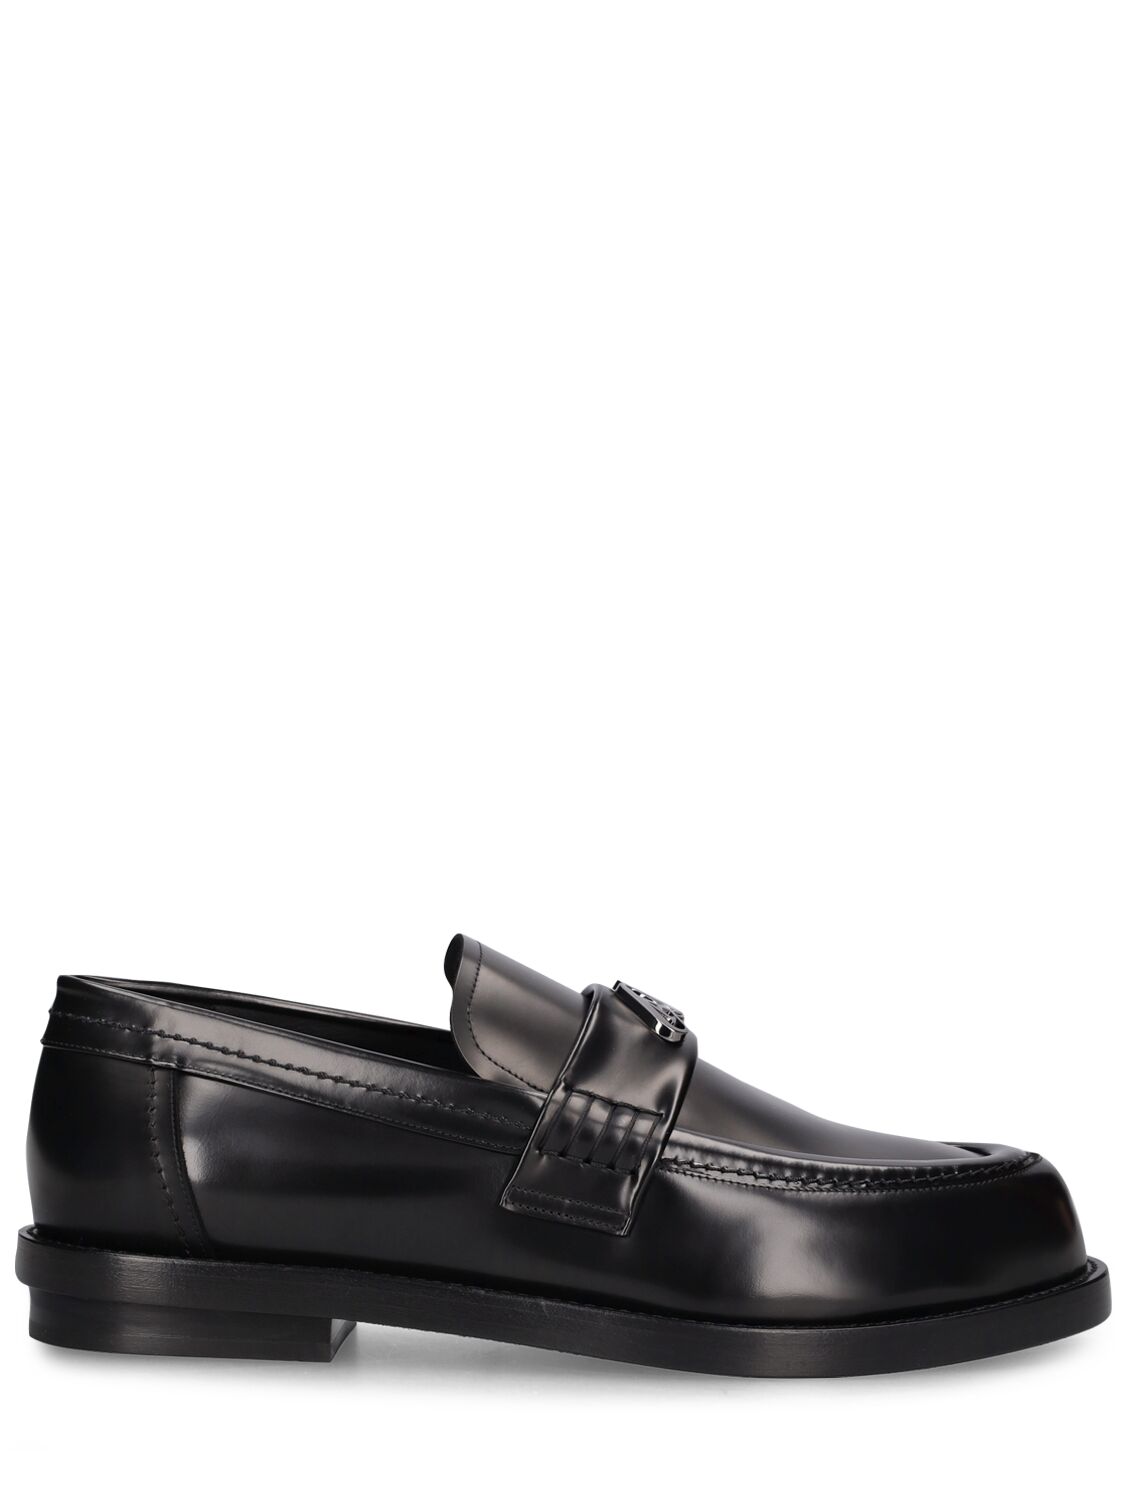 Alexander Mcqueen Seal Leather Loafers In Black